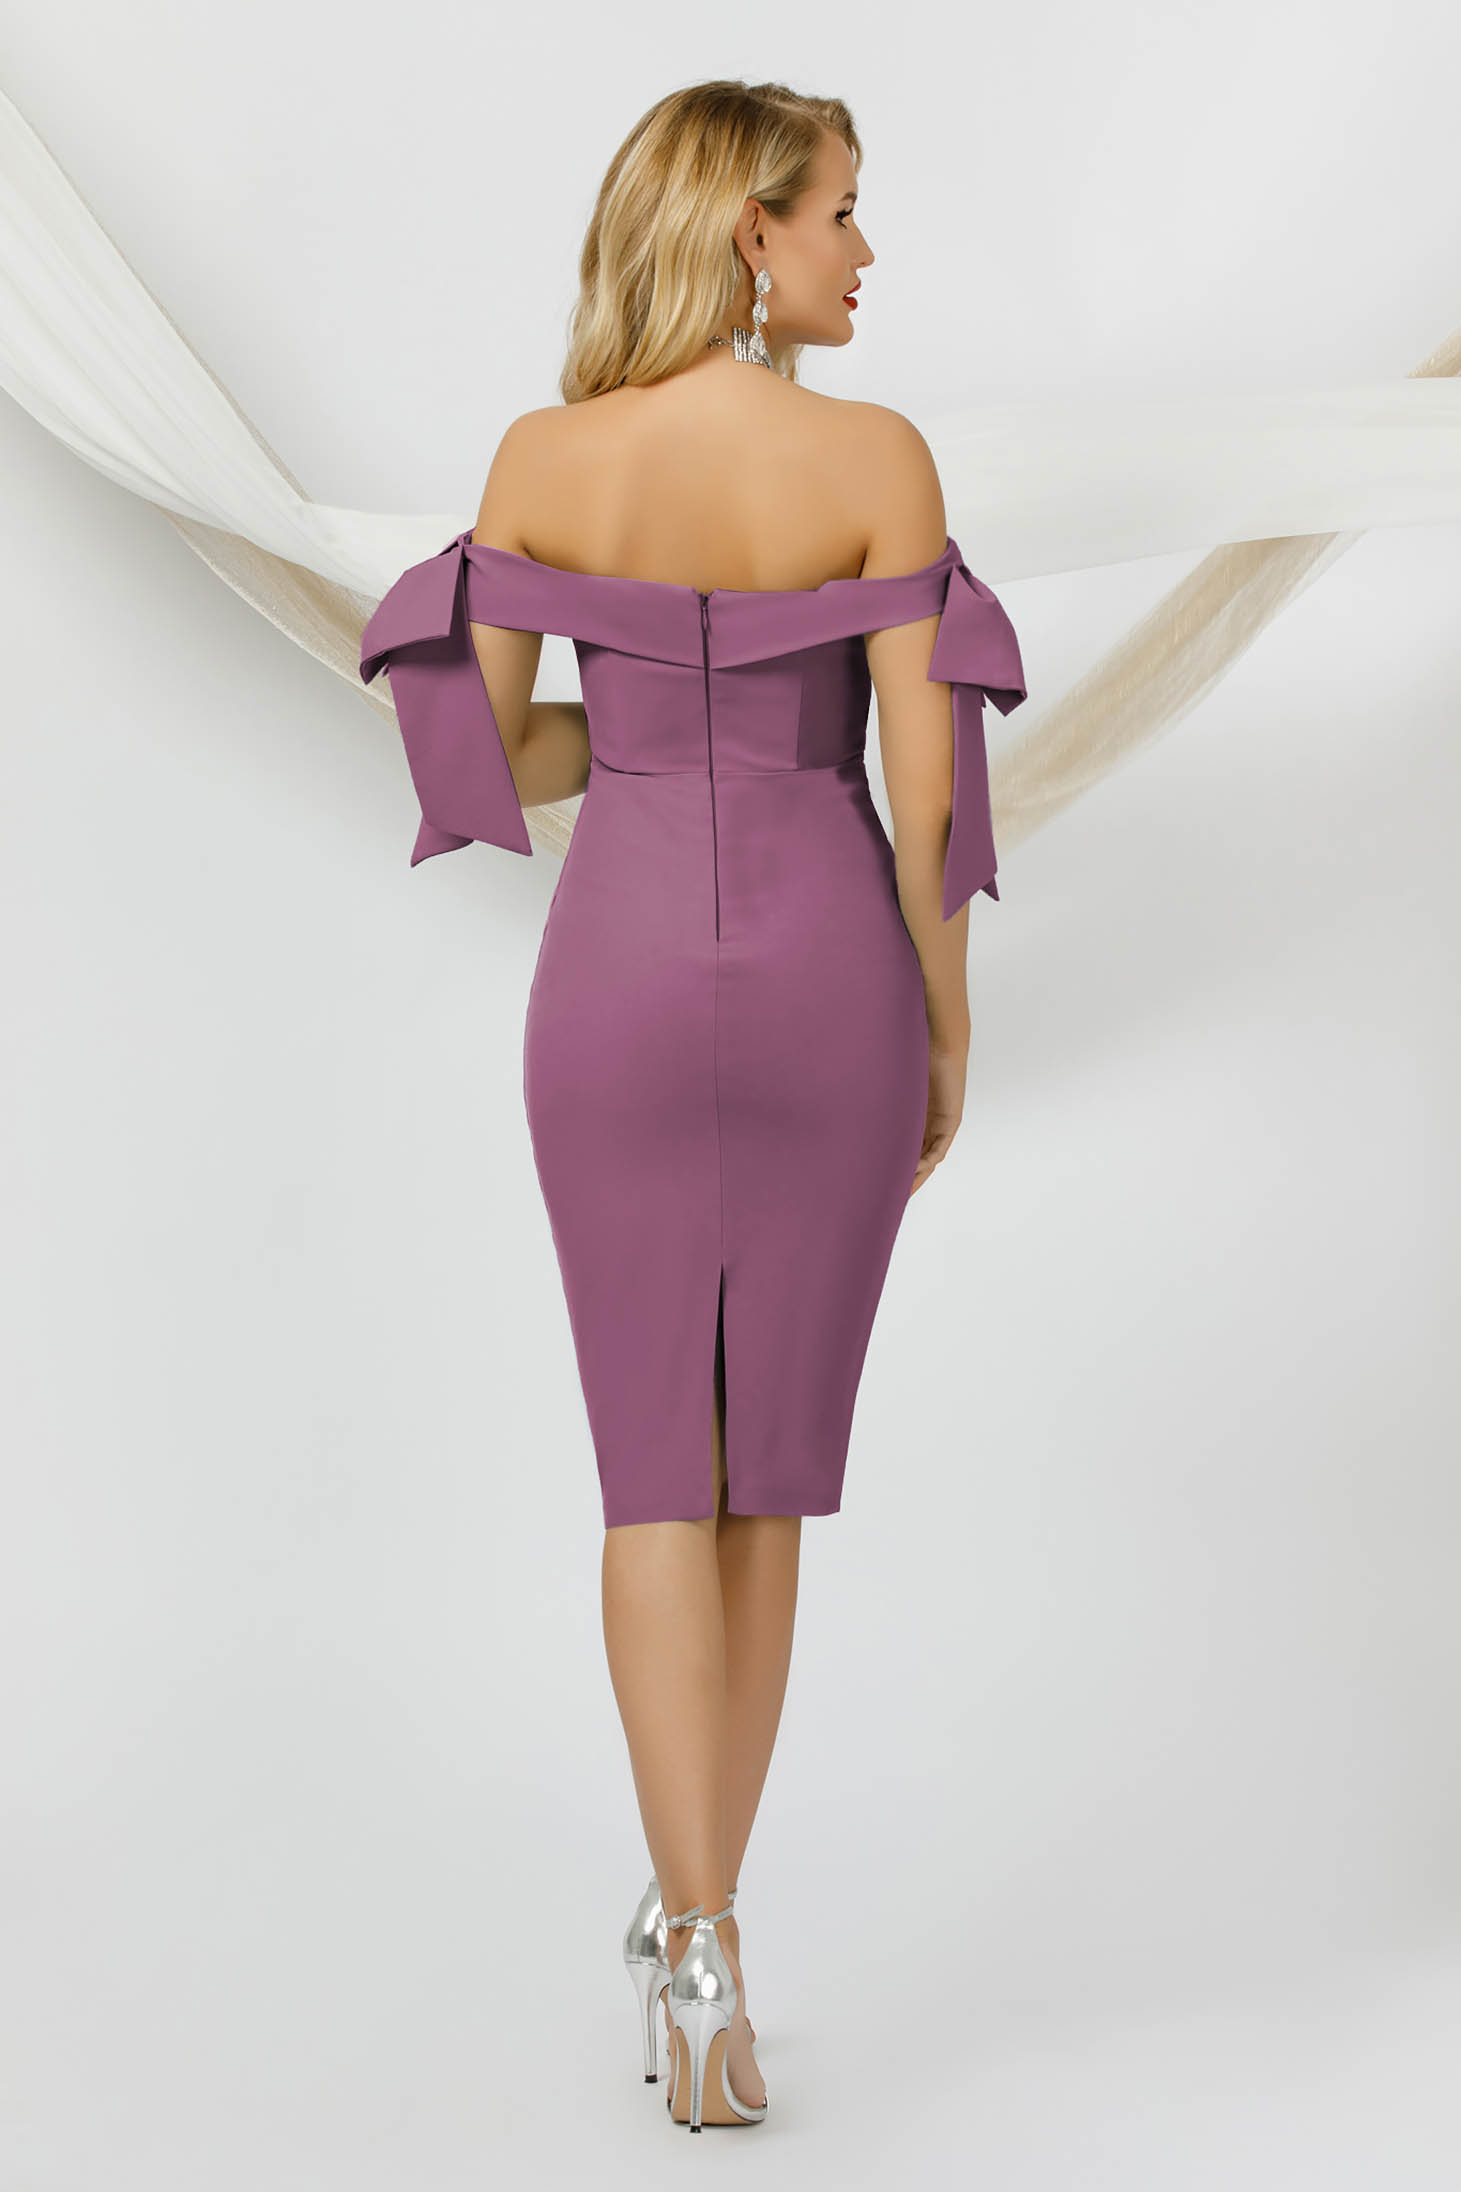 Purple Pencil Dress made of thin material accessorized with bows - PrettyGirl 3 - StarShinerS.com